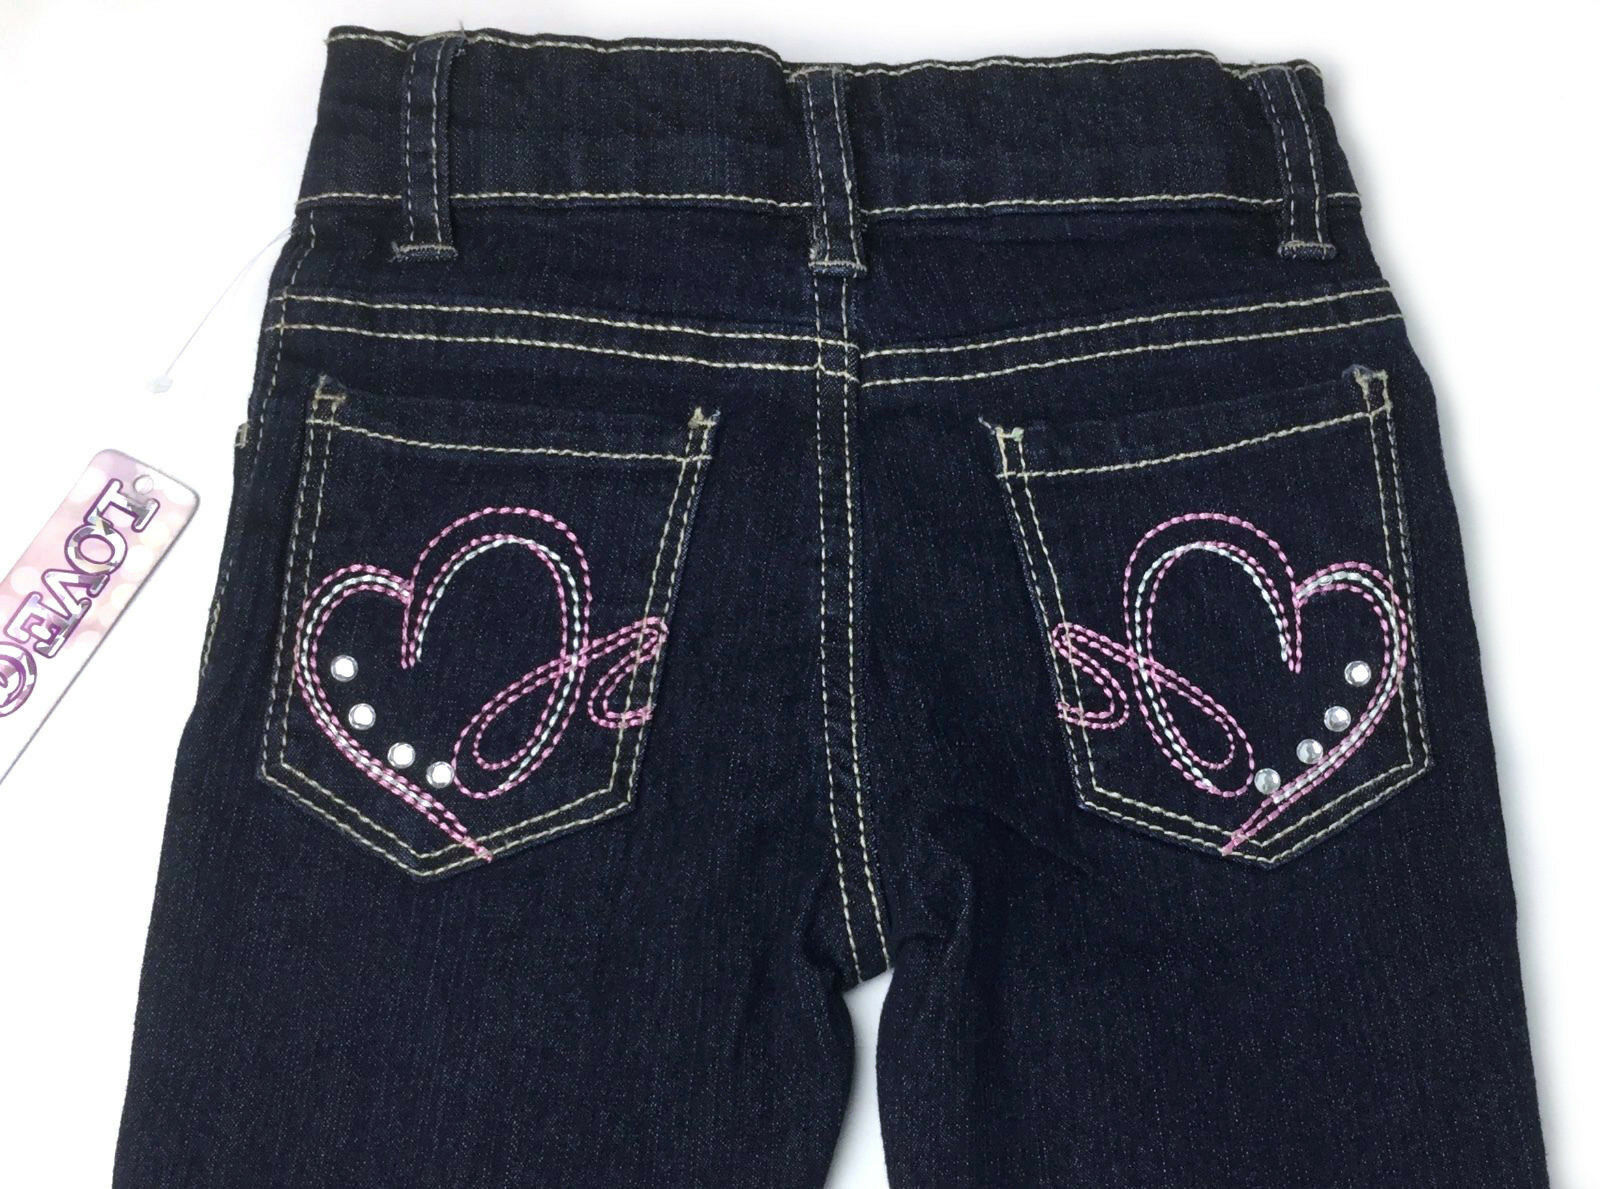 Girl's Toddlers Size 2t Embellished Jeans Denim Pants Love At First Sight